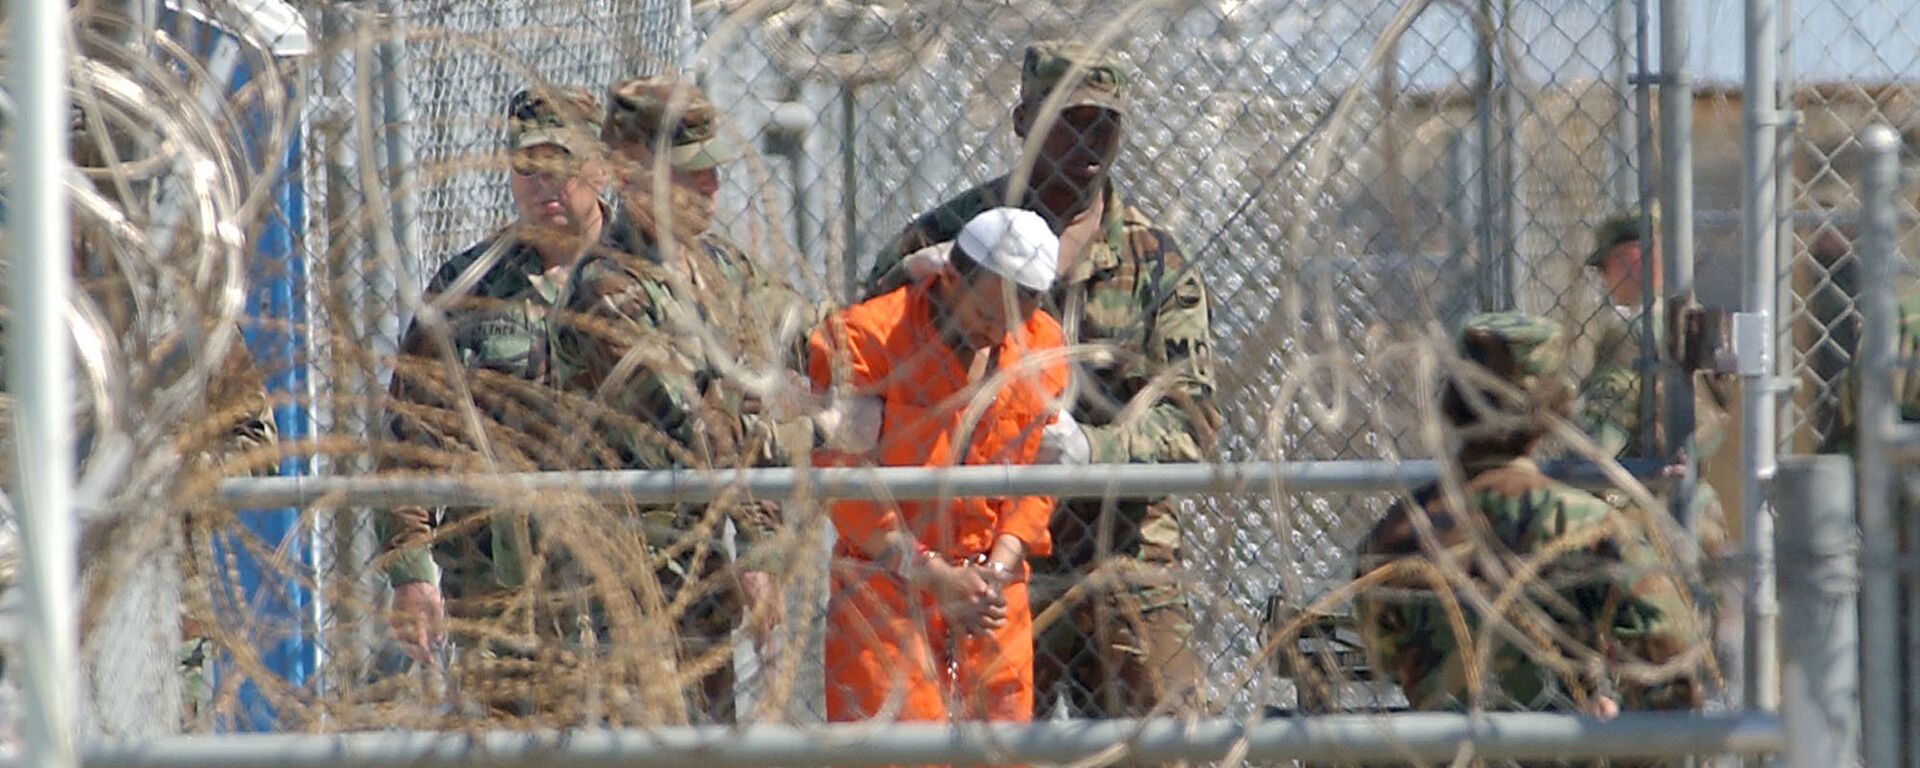 A detainee from Afghanistan is led by military police with his hands chained at Camp X-Ray at the U.S. Naval Base in Guantanamo Bay, Cuba, in this Feb. 2, 2002, file photo - Sputnik International, 1920, 09.09.2021